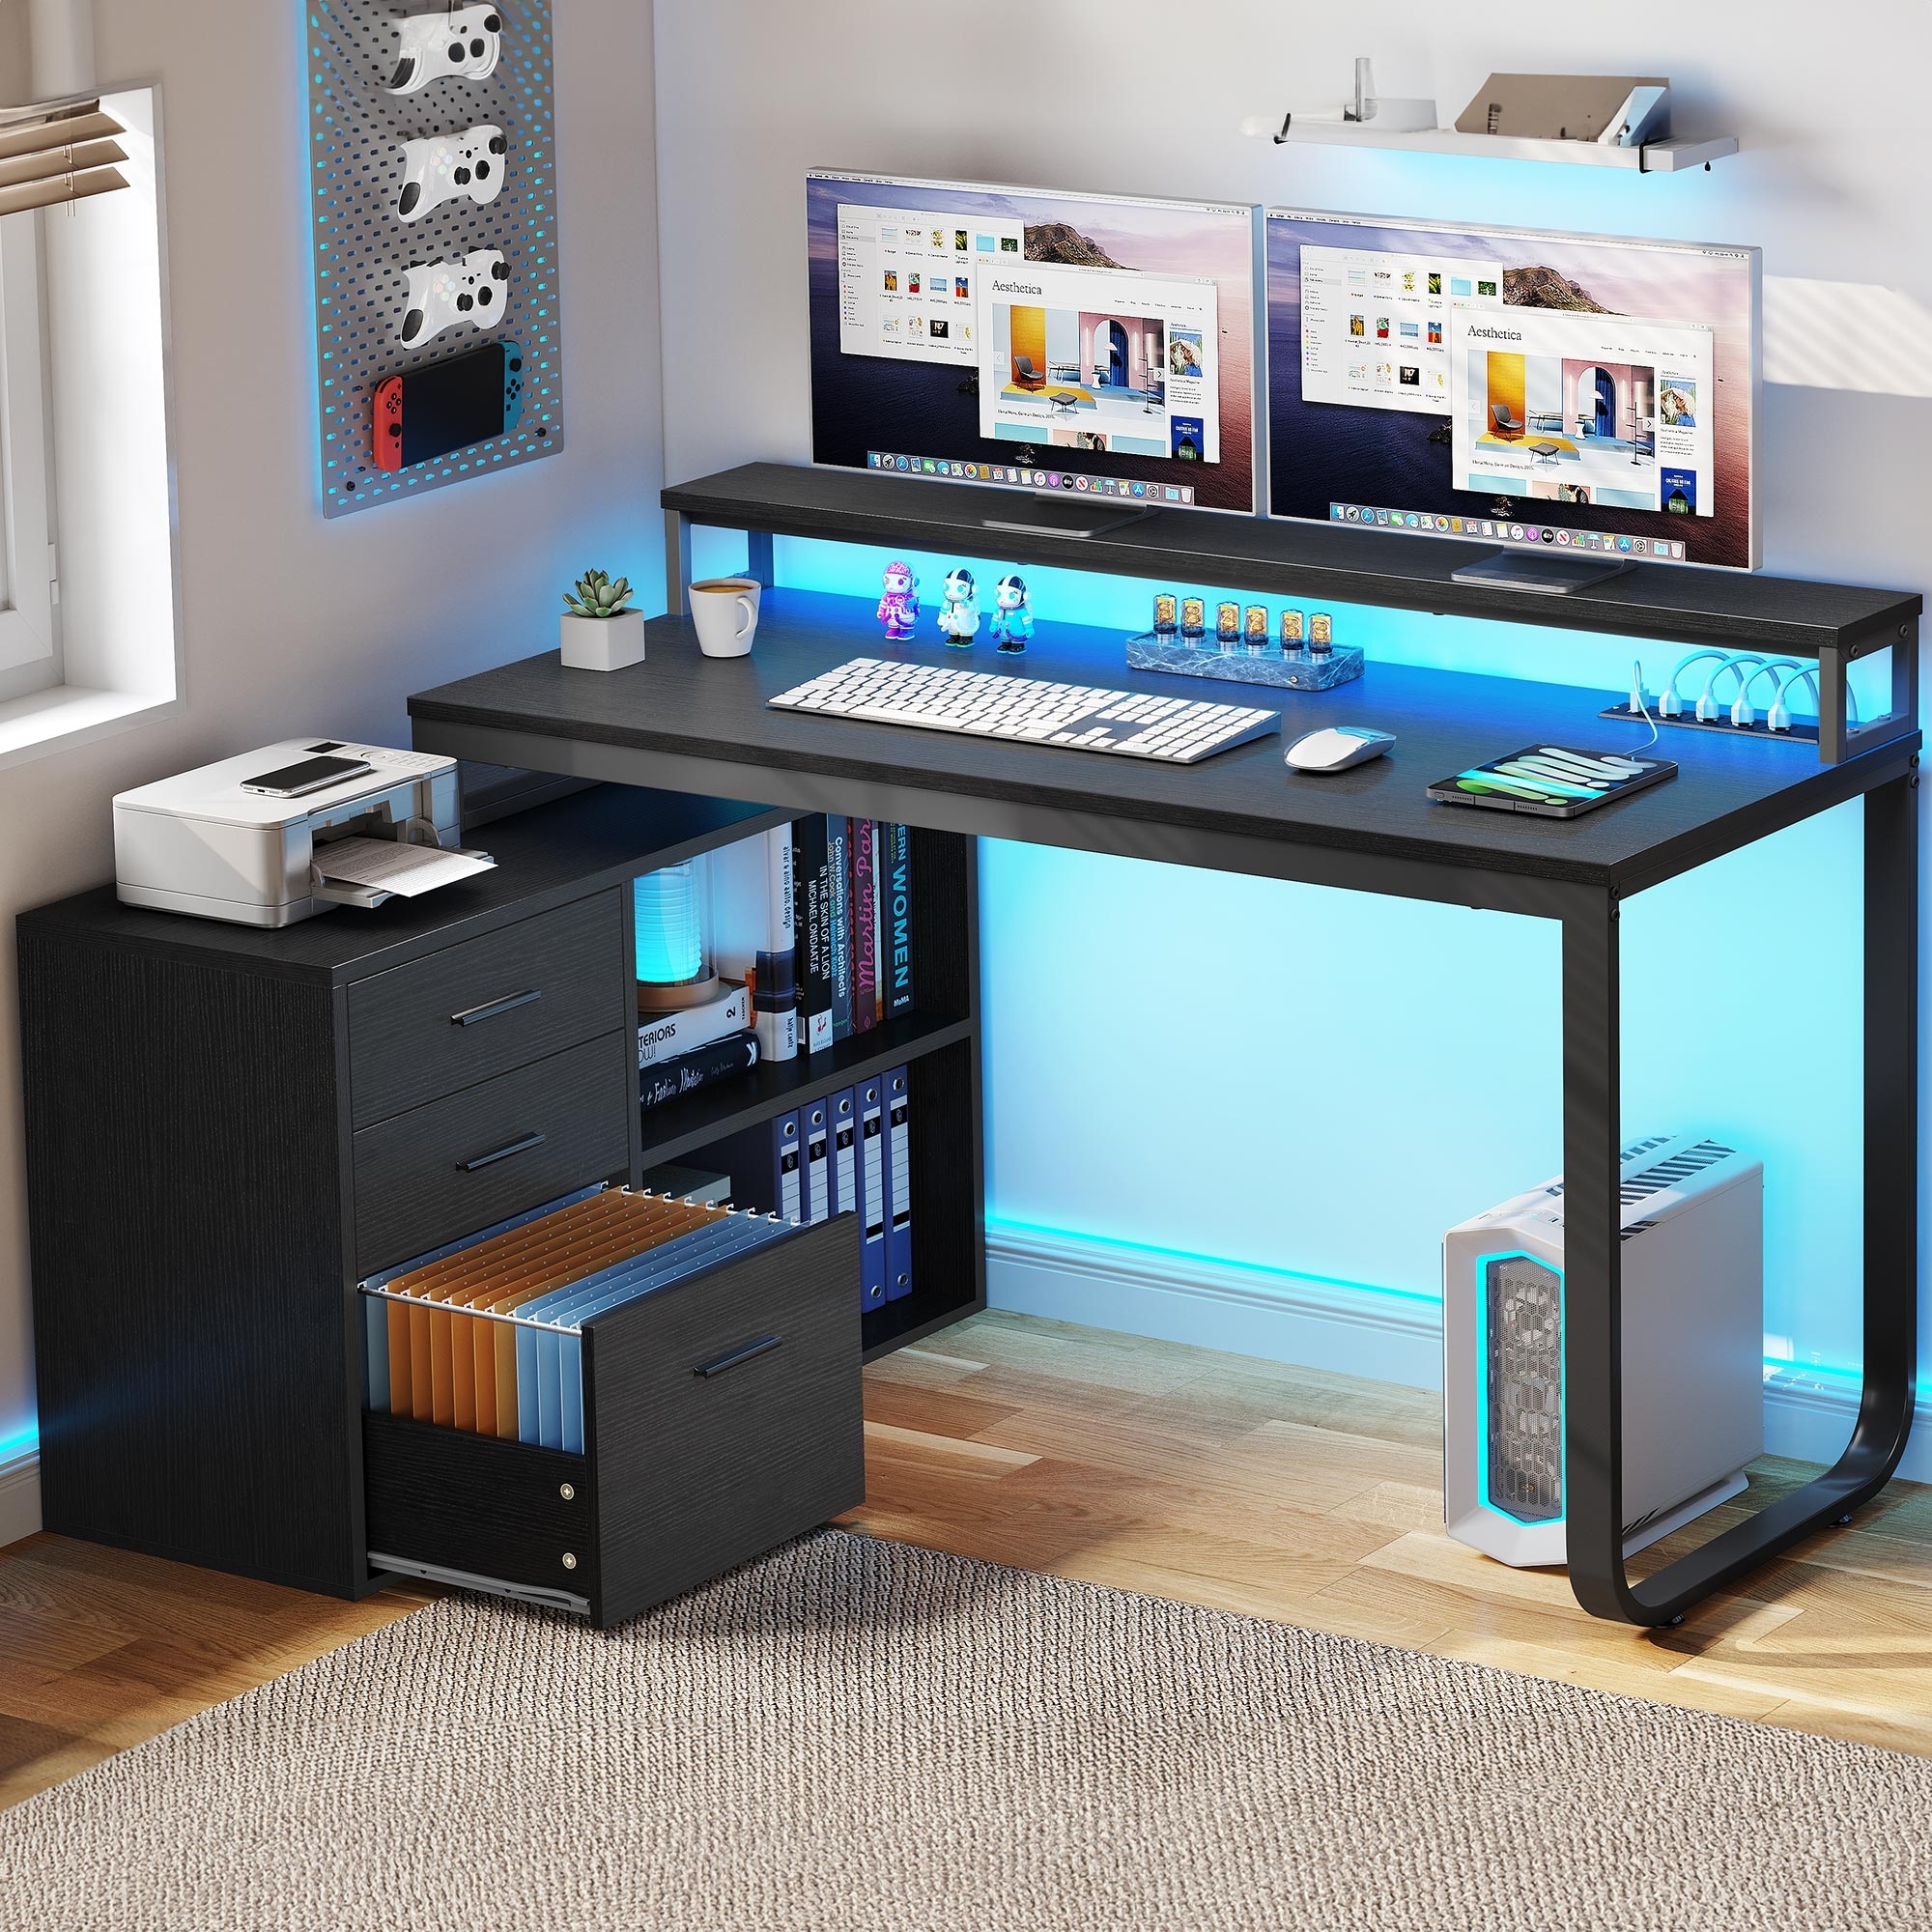 https://ak1.ostkcdn.com/images/products/is/images/direct/240a09c40094ef696915ab8f52bb92e9cba0d75b/55-Inch-L-shaped-Desk-with-Power-Outlets-and-LED-Lights-Computer-Corner-Desk-with-File-Cabinet-Monitor-Stand.jpg